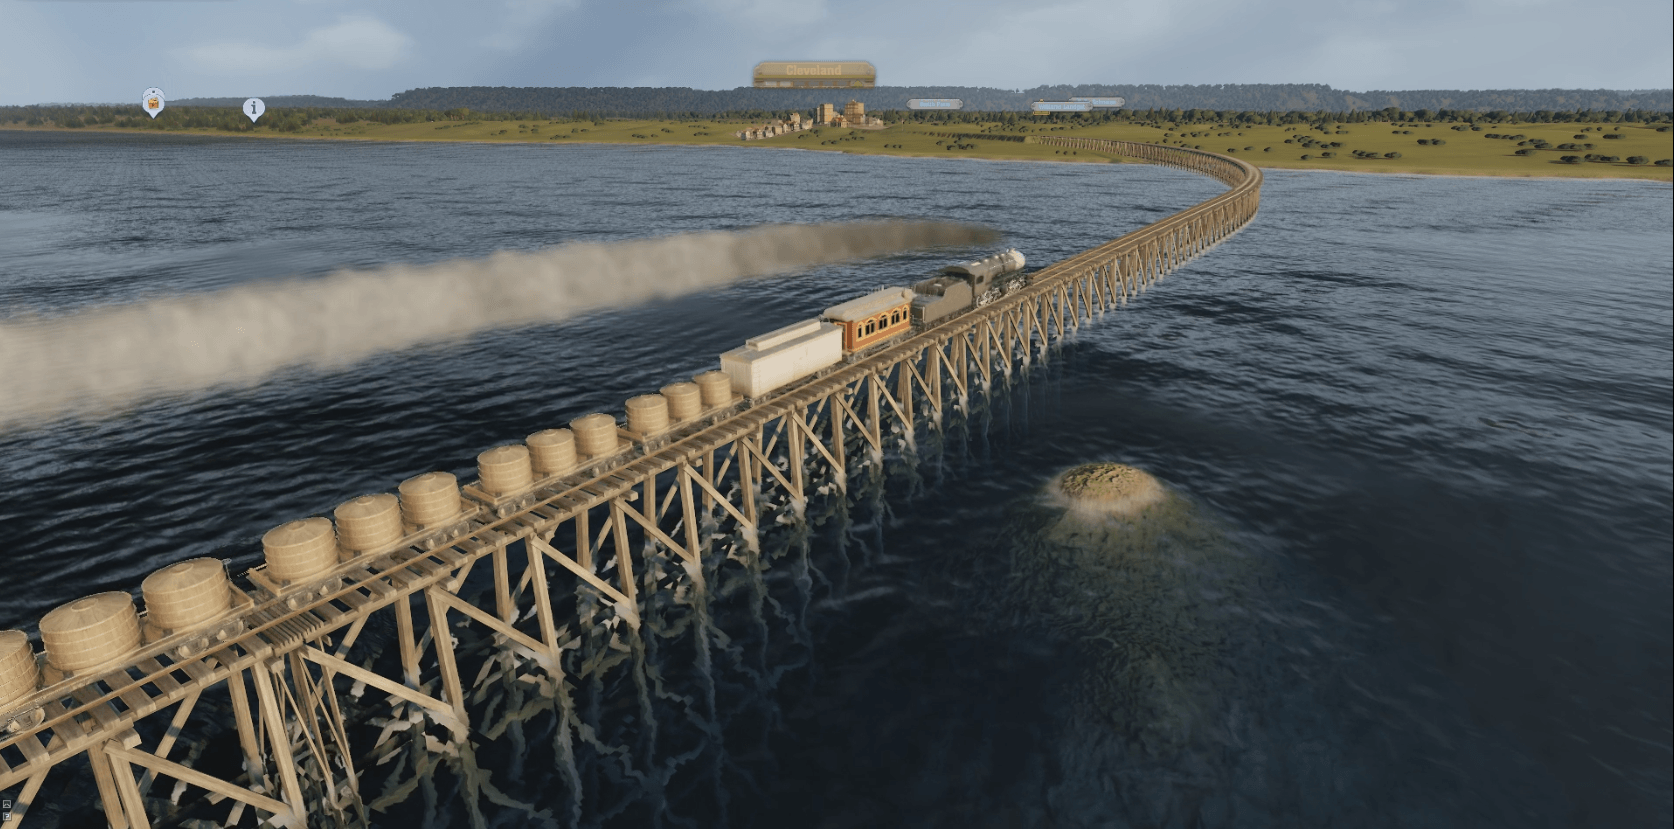 Railway Empire details its sophisticated AI system